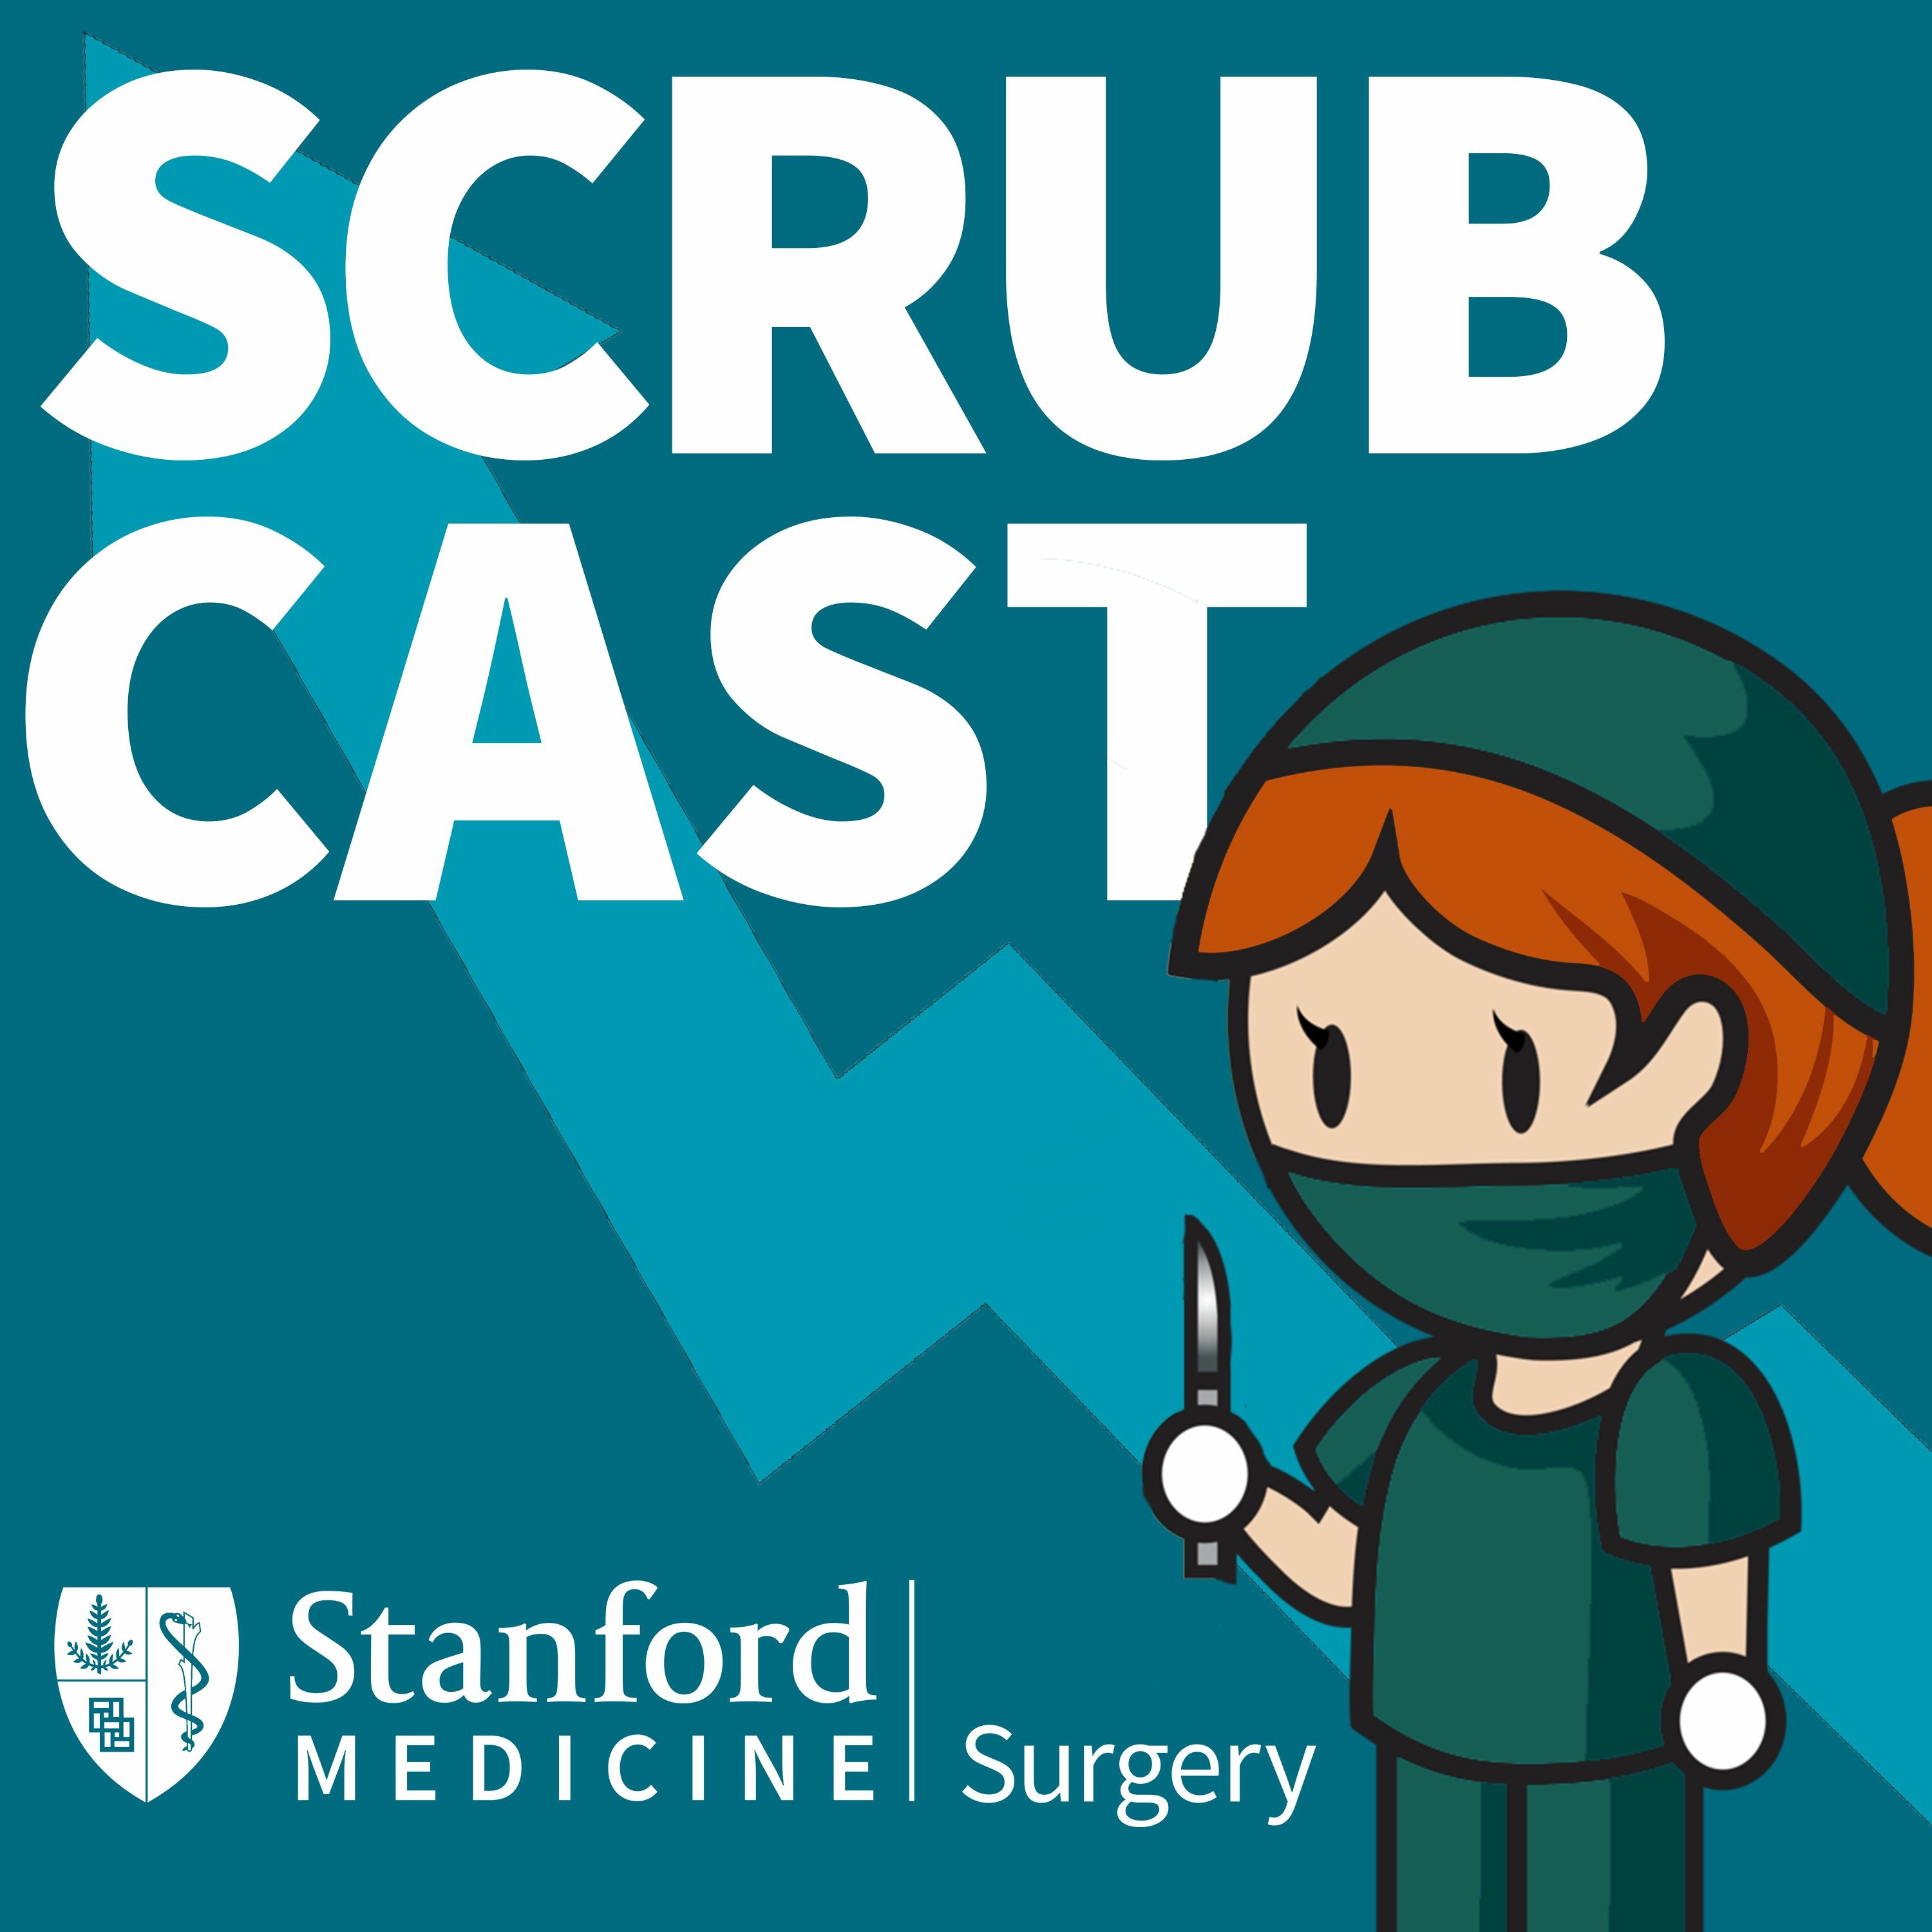 The Role of Plastic Surgery in Critical Care Medicine with Dr. Benjamin Levi